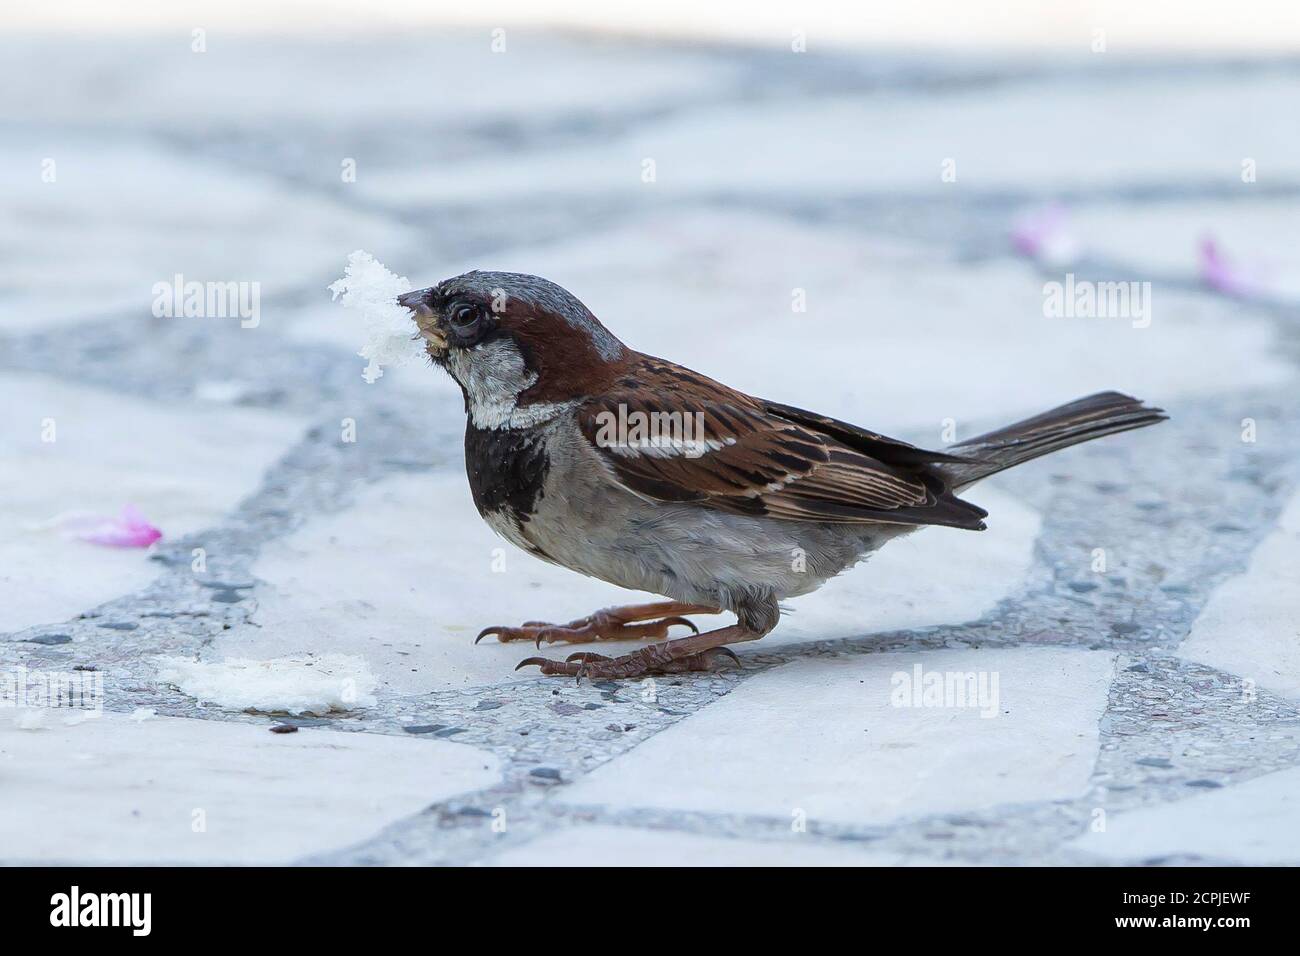 Belgrade, Serbia. 19th September, 2020. A sparrow eats a piece of bread during the Coronavirus disease (COVID-19) after the increase of coronavirus infected in Belgrade, Serbia on September 19, 2020. The new measures of the Crisis Staff to prevent the spread of the corona virus will come into force tonight, and all citizens of Serbia who enter the country from 6 pm will be under special health supervision. At the border, they will receive warnings with instructions on where and how to report them, even though they do not have symptoms of coronavirus. The first step is the self-assessment test Stock Photo